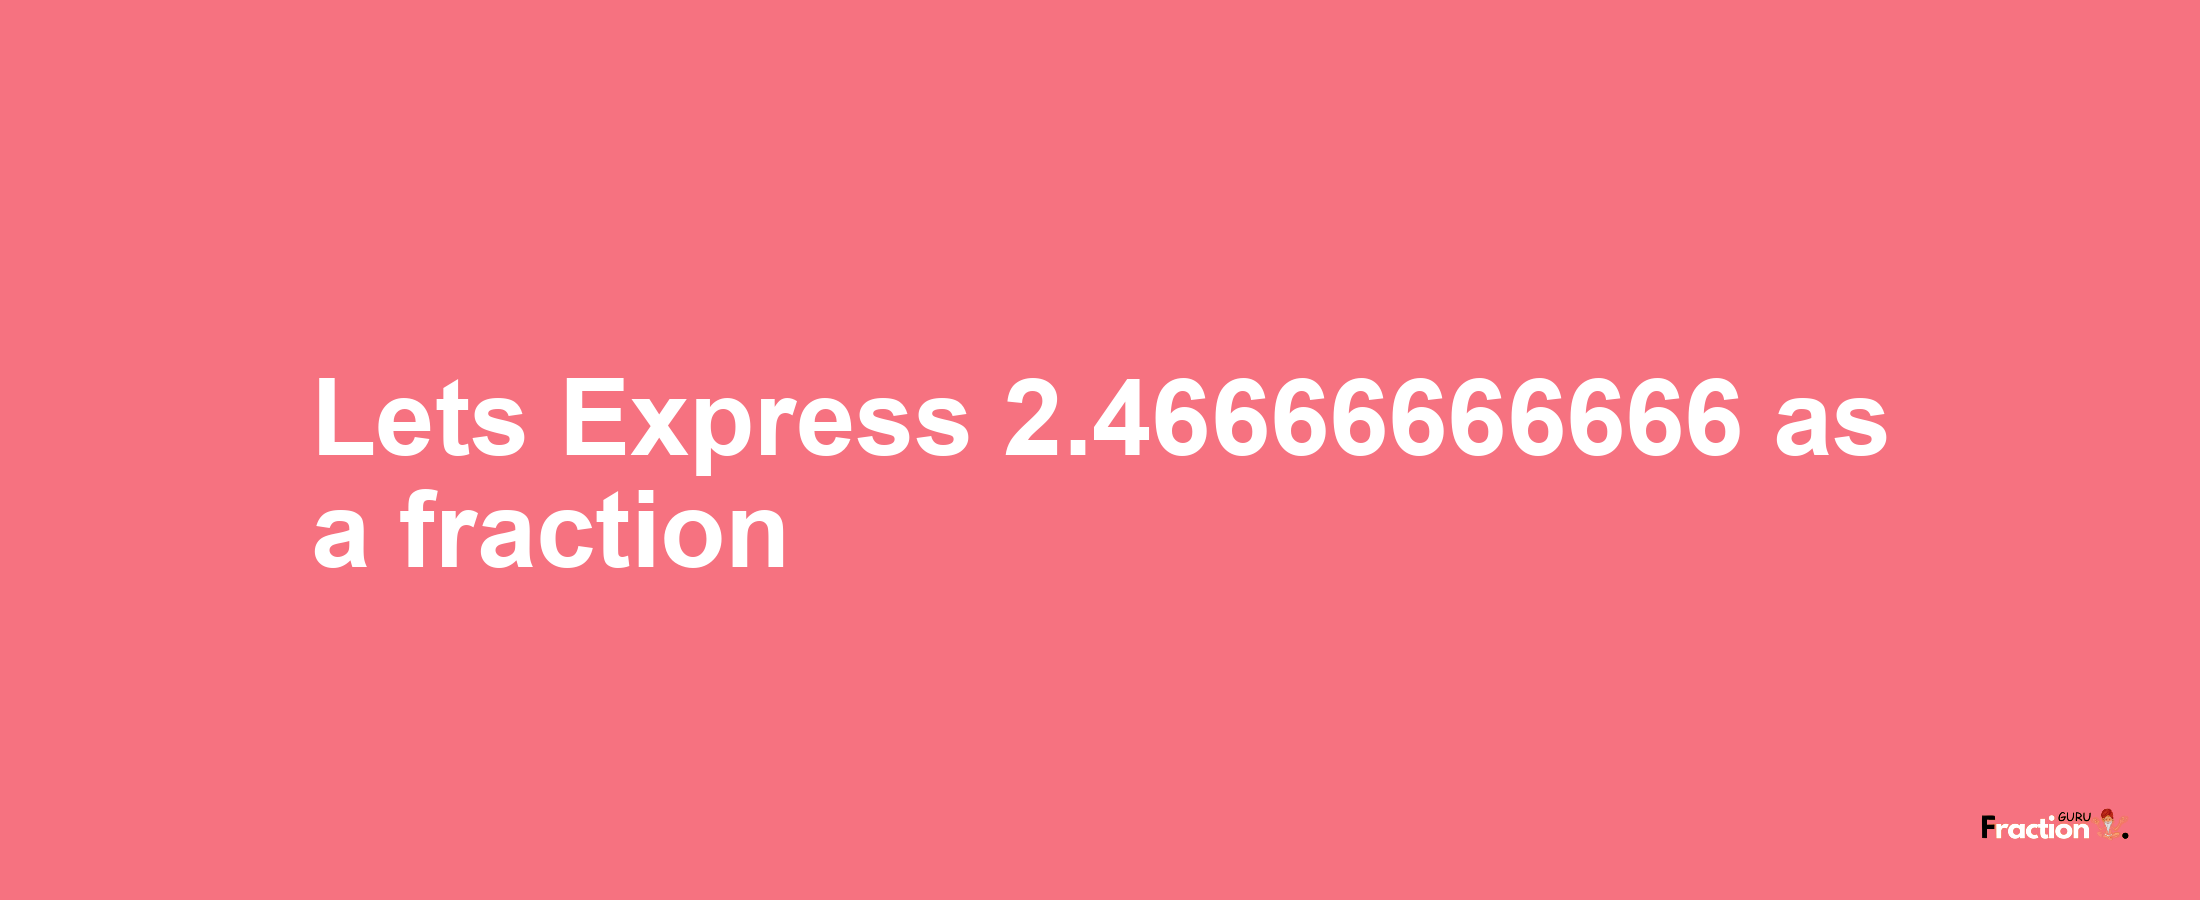 Lets Express 2.46666666666 as afraction